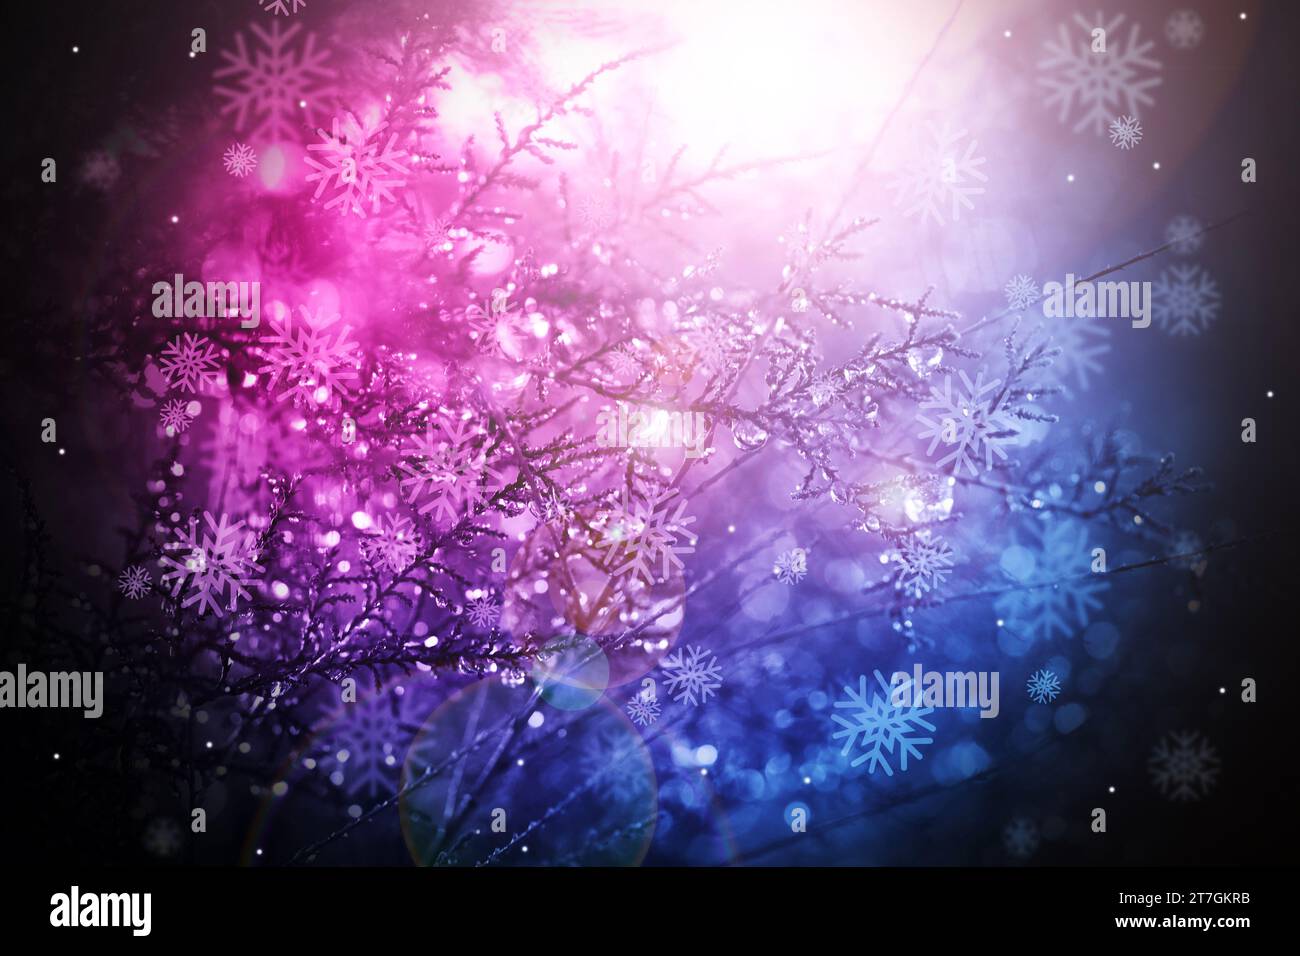 Pine tree in gardient color with snow drop for winter or christmas celebration background. Stock Photo